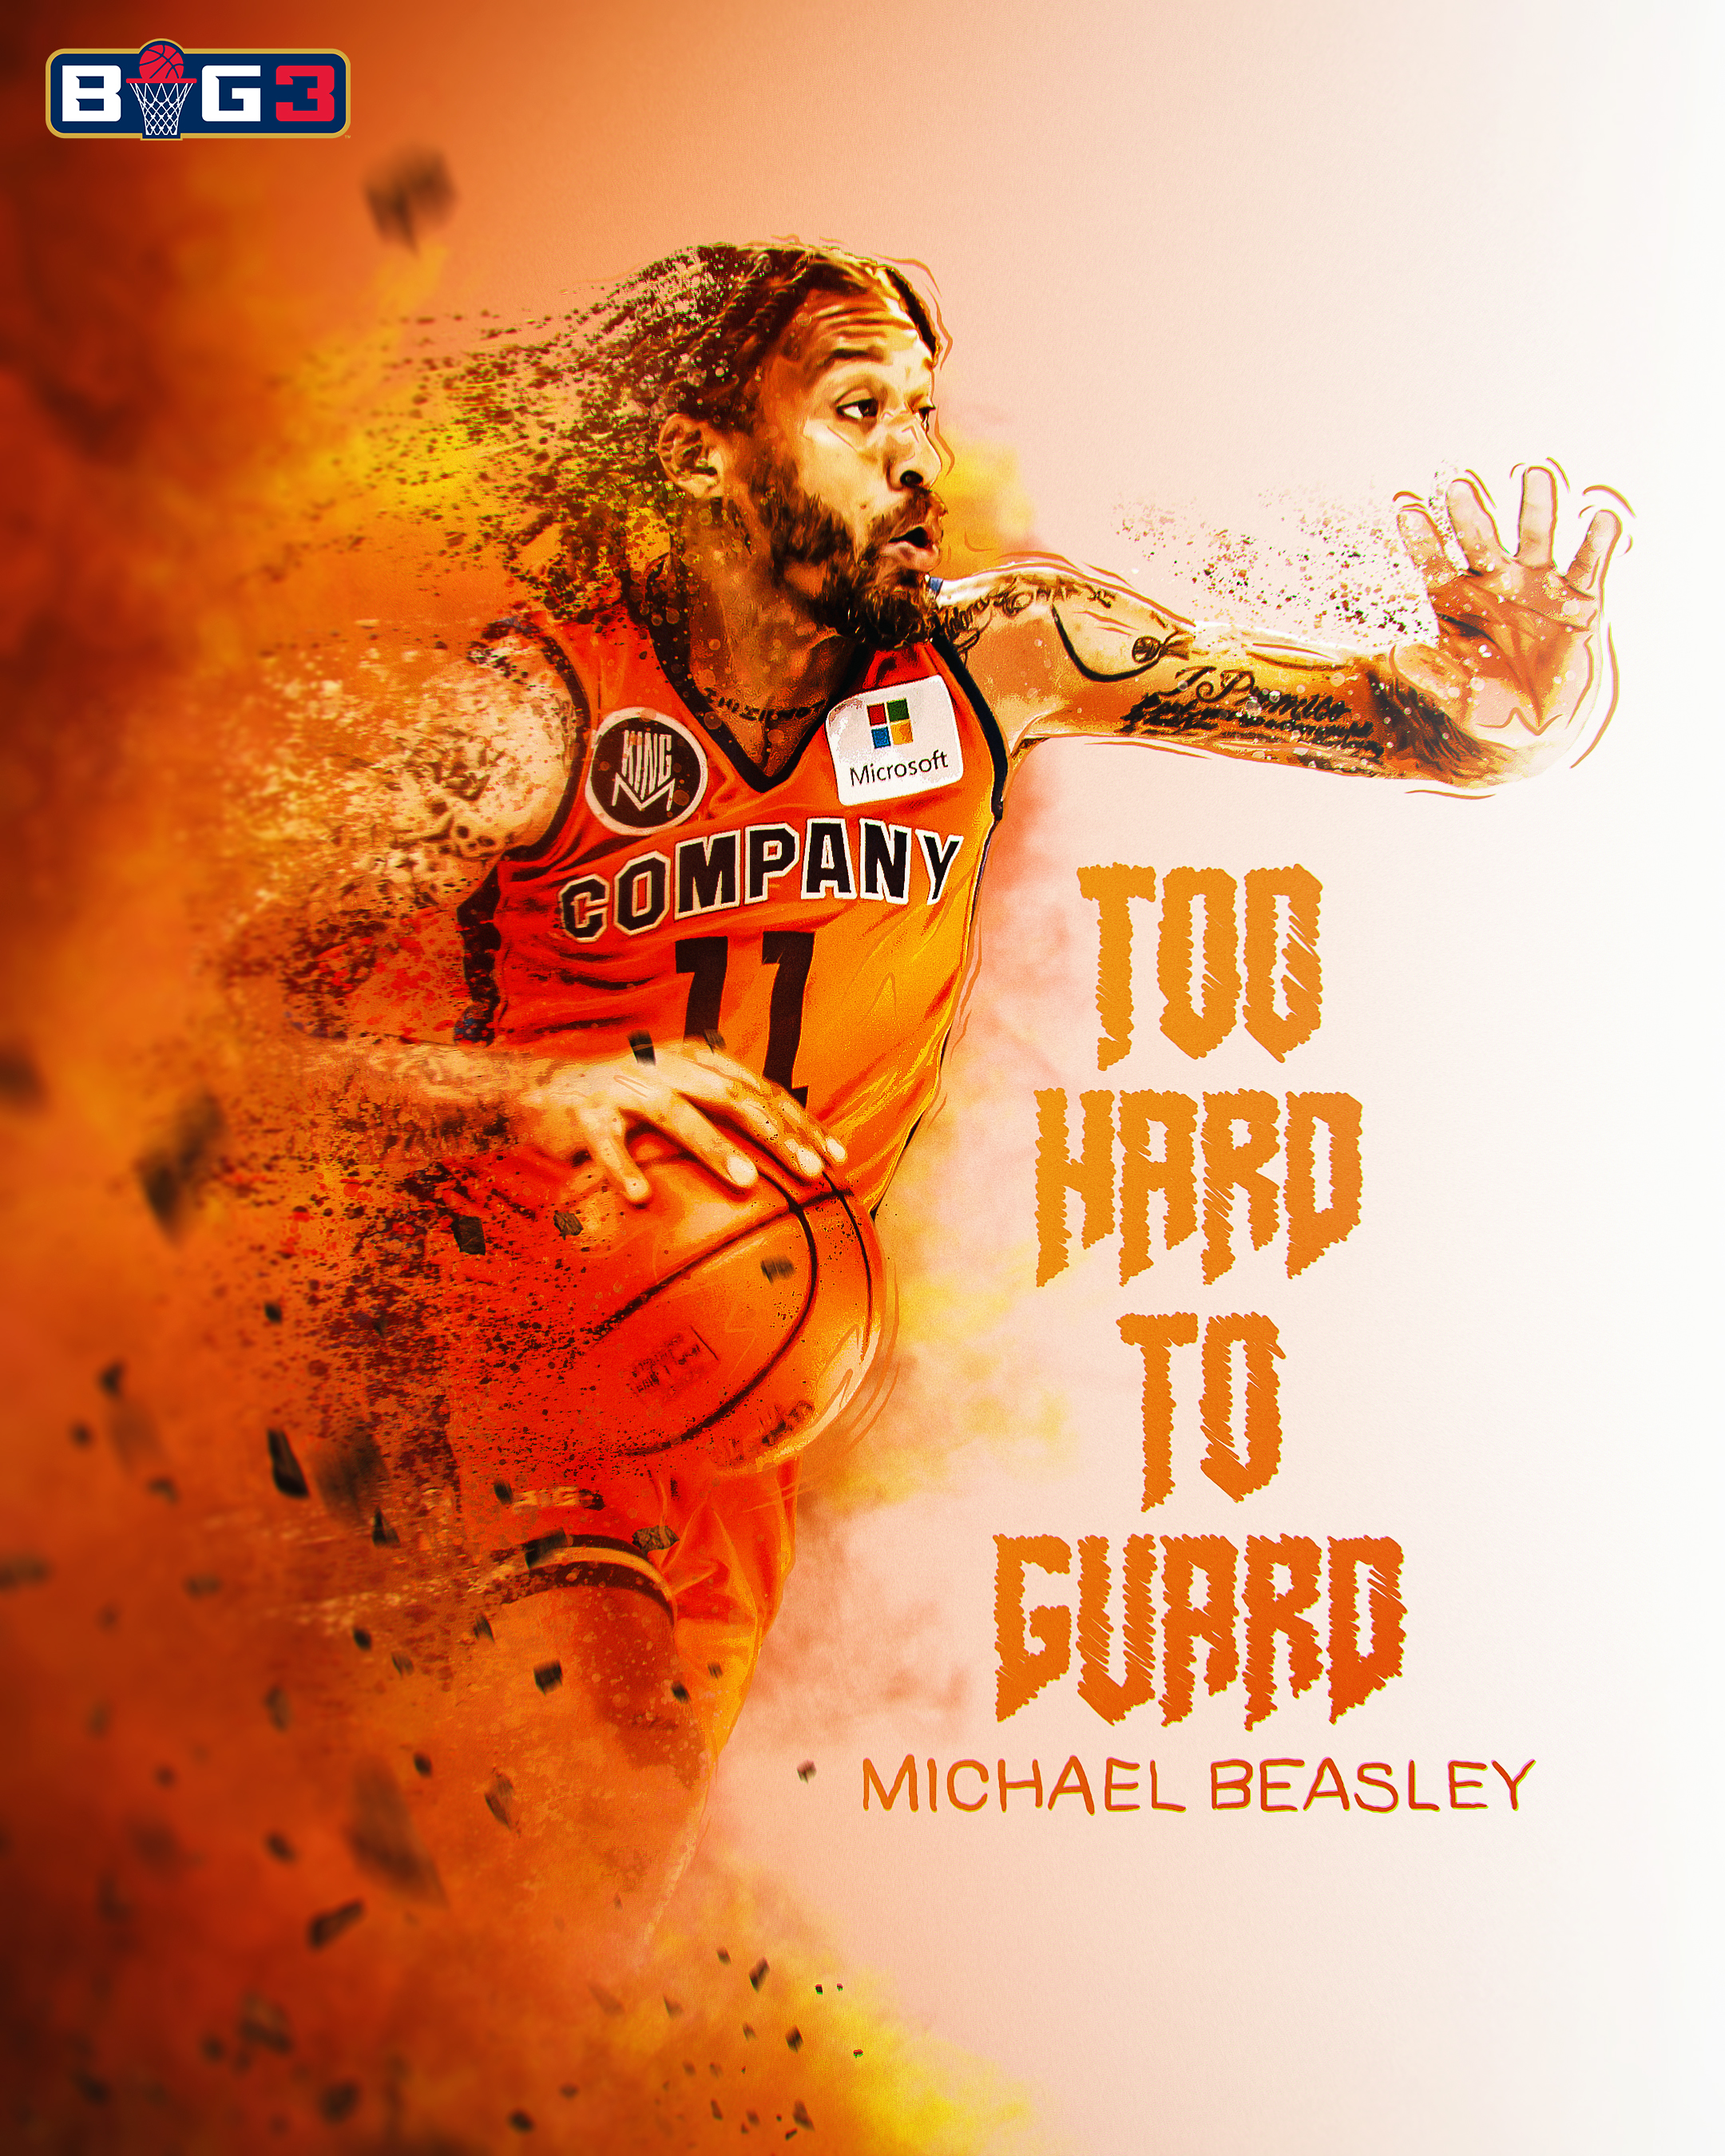 The powerful myth of Michael Beasley's talent 